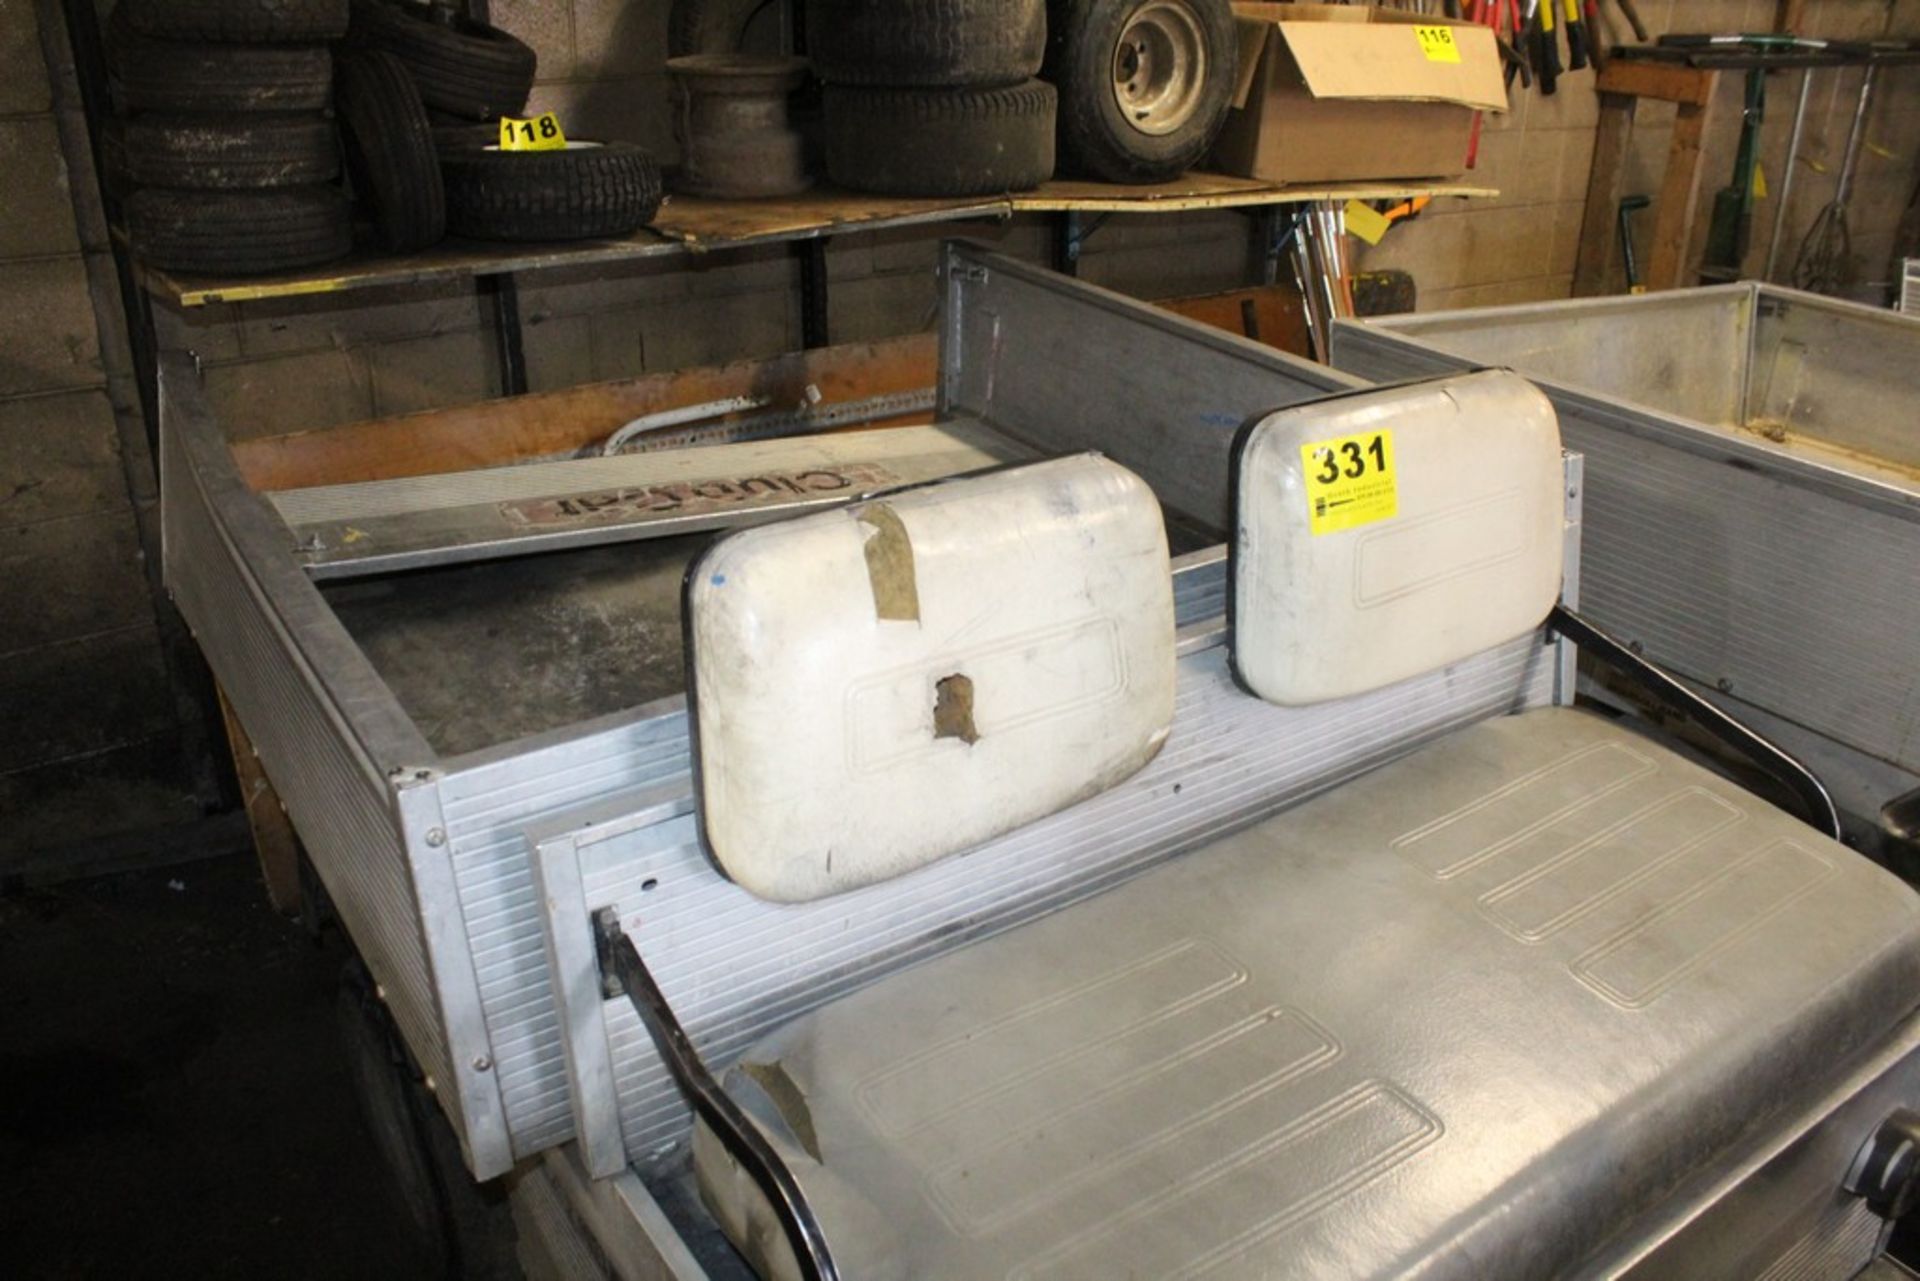 CLUB CAR CARRYALL II CART, MANUAL DUMP BED GAS POWERED CONDITION: TURNS OVER WITH A JUMP - Image 3 of 4